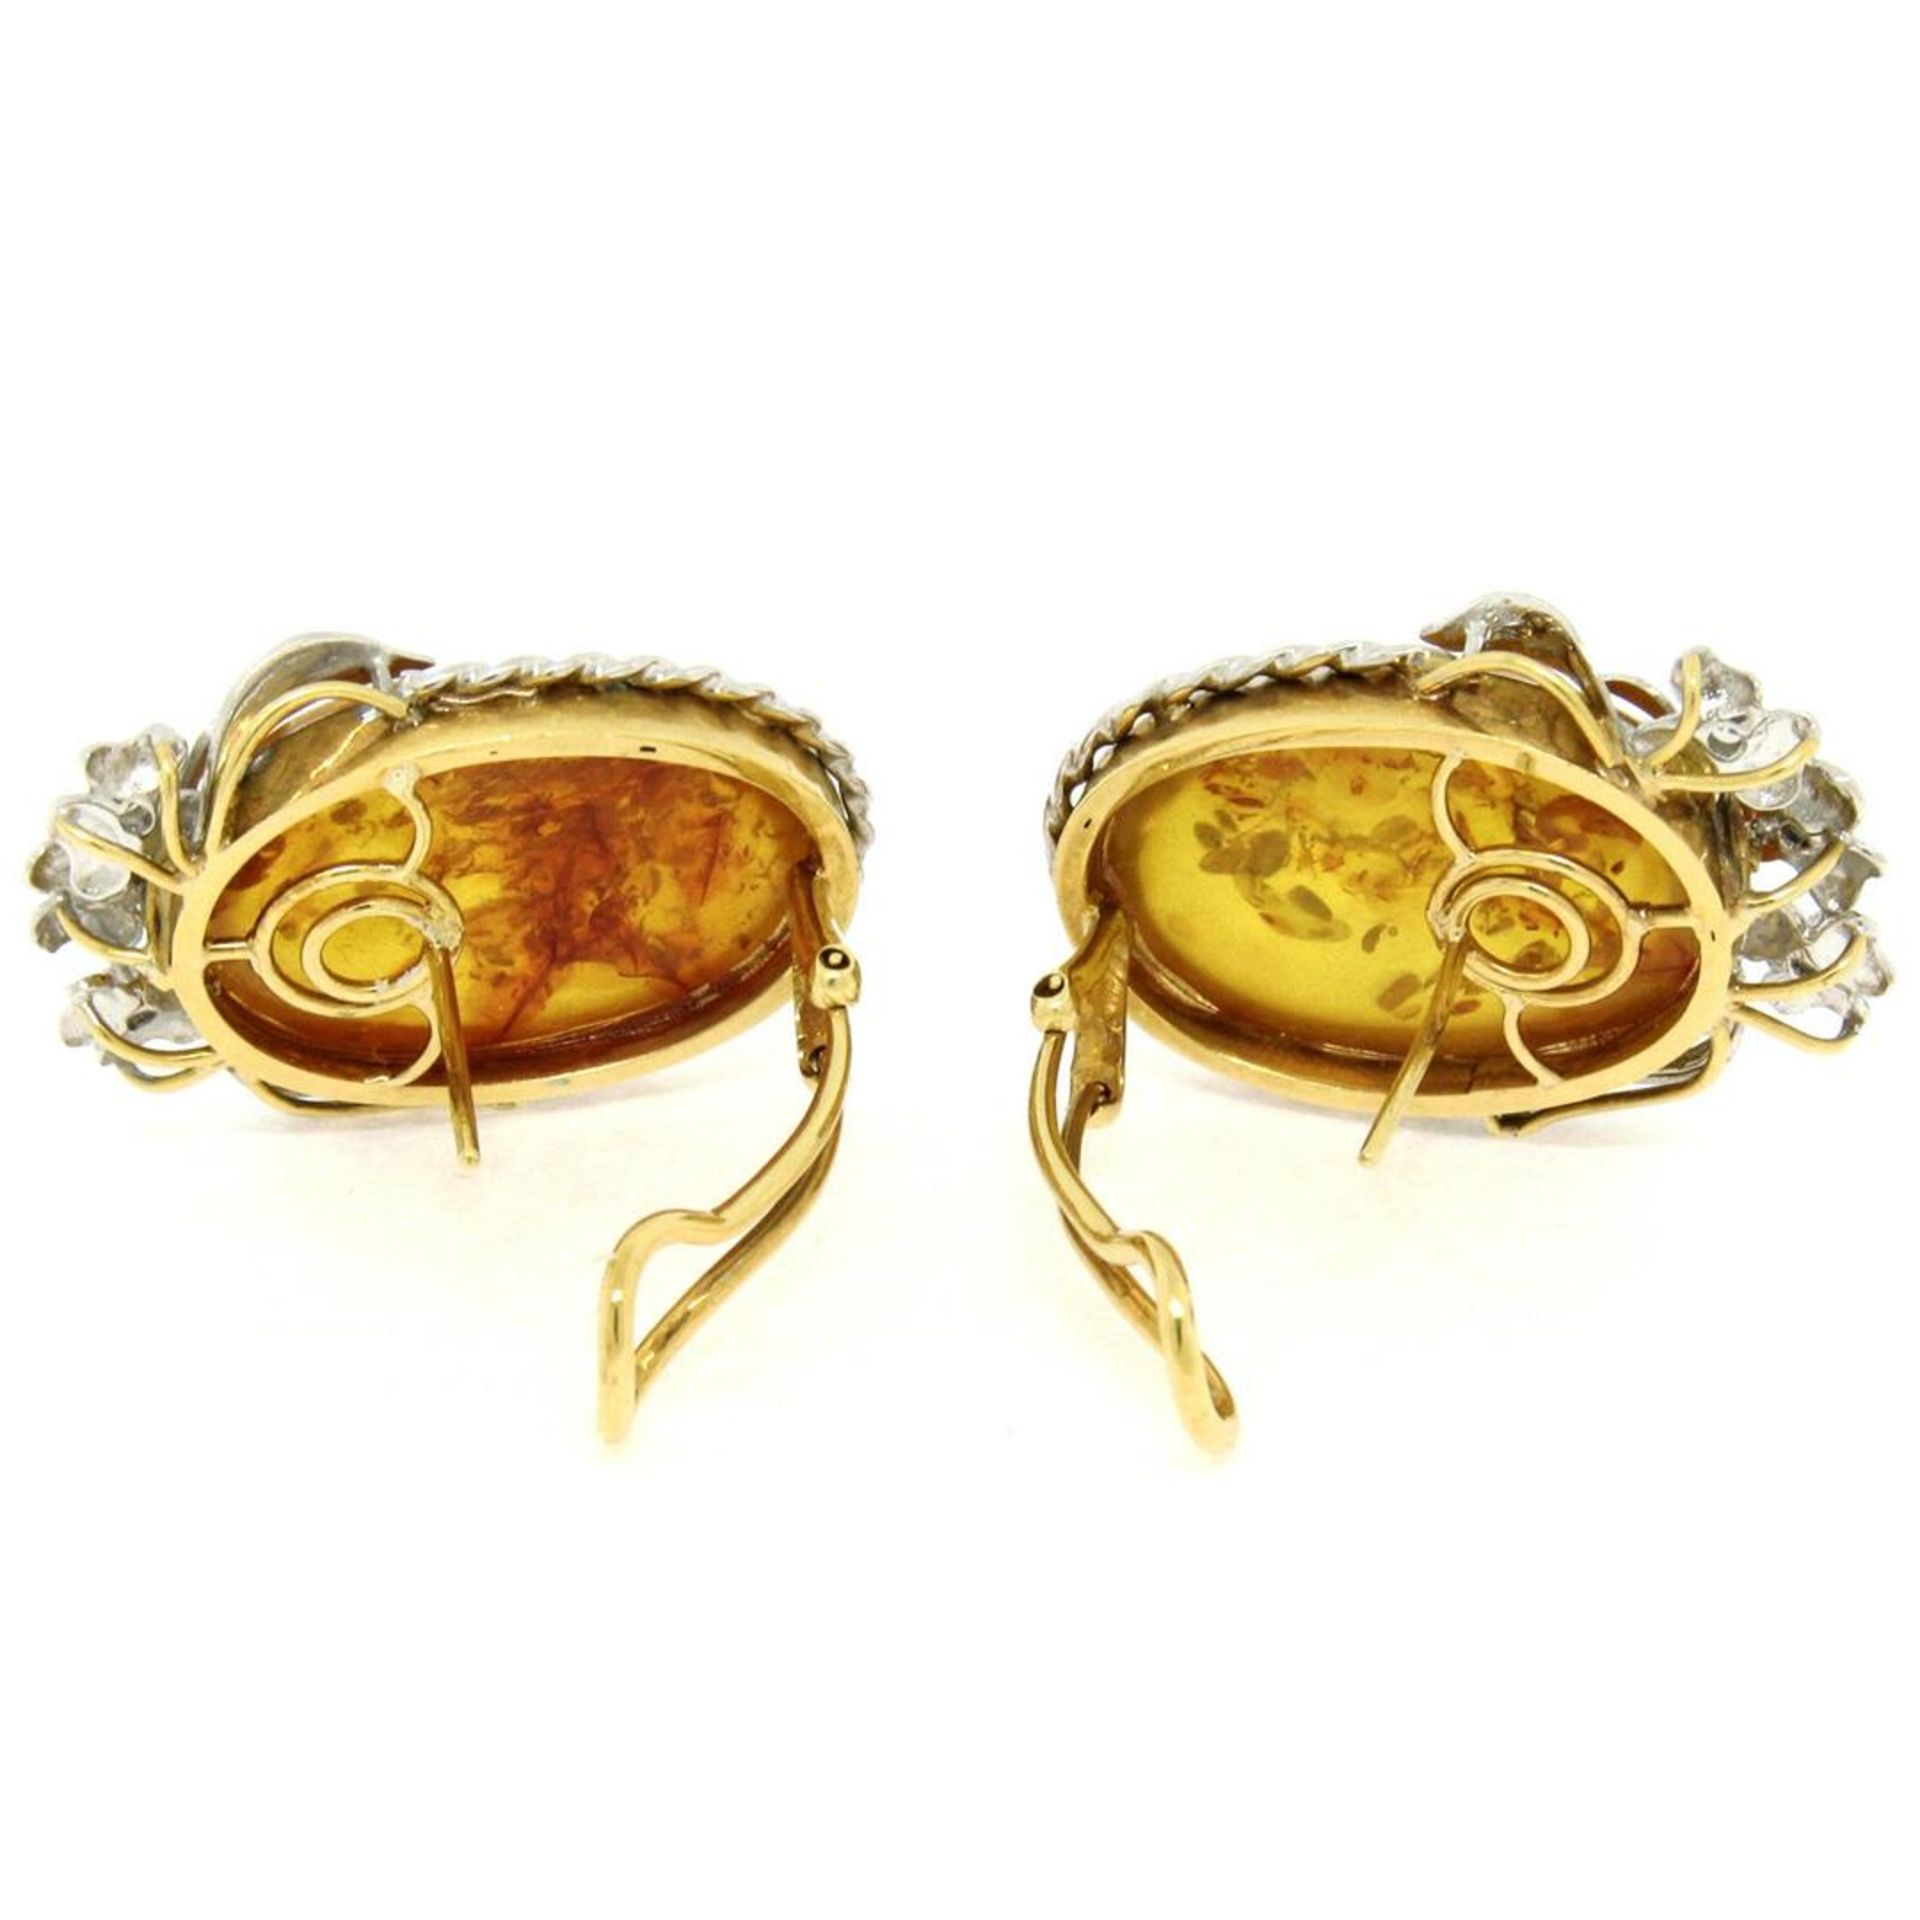 Vintage 18k White Gold Large Oval Amber Diamond Omega Earrings w/ Flower Etching - Image 6 of 6